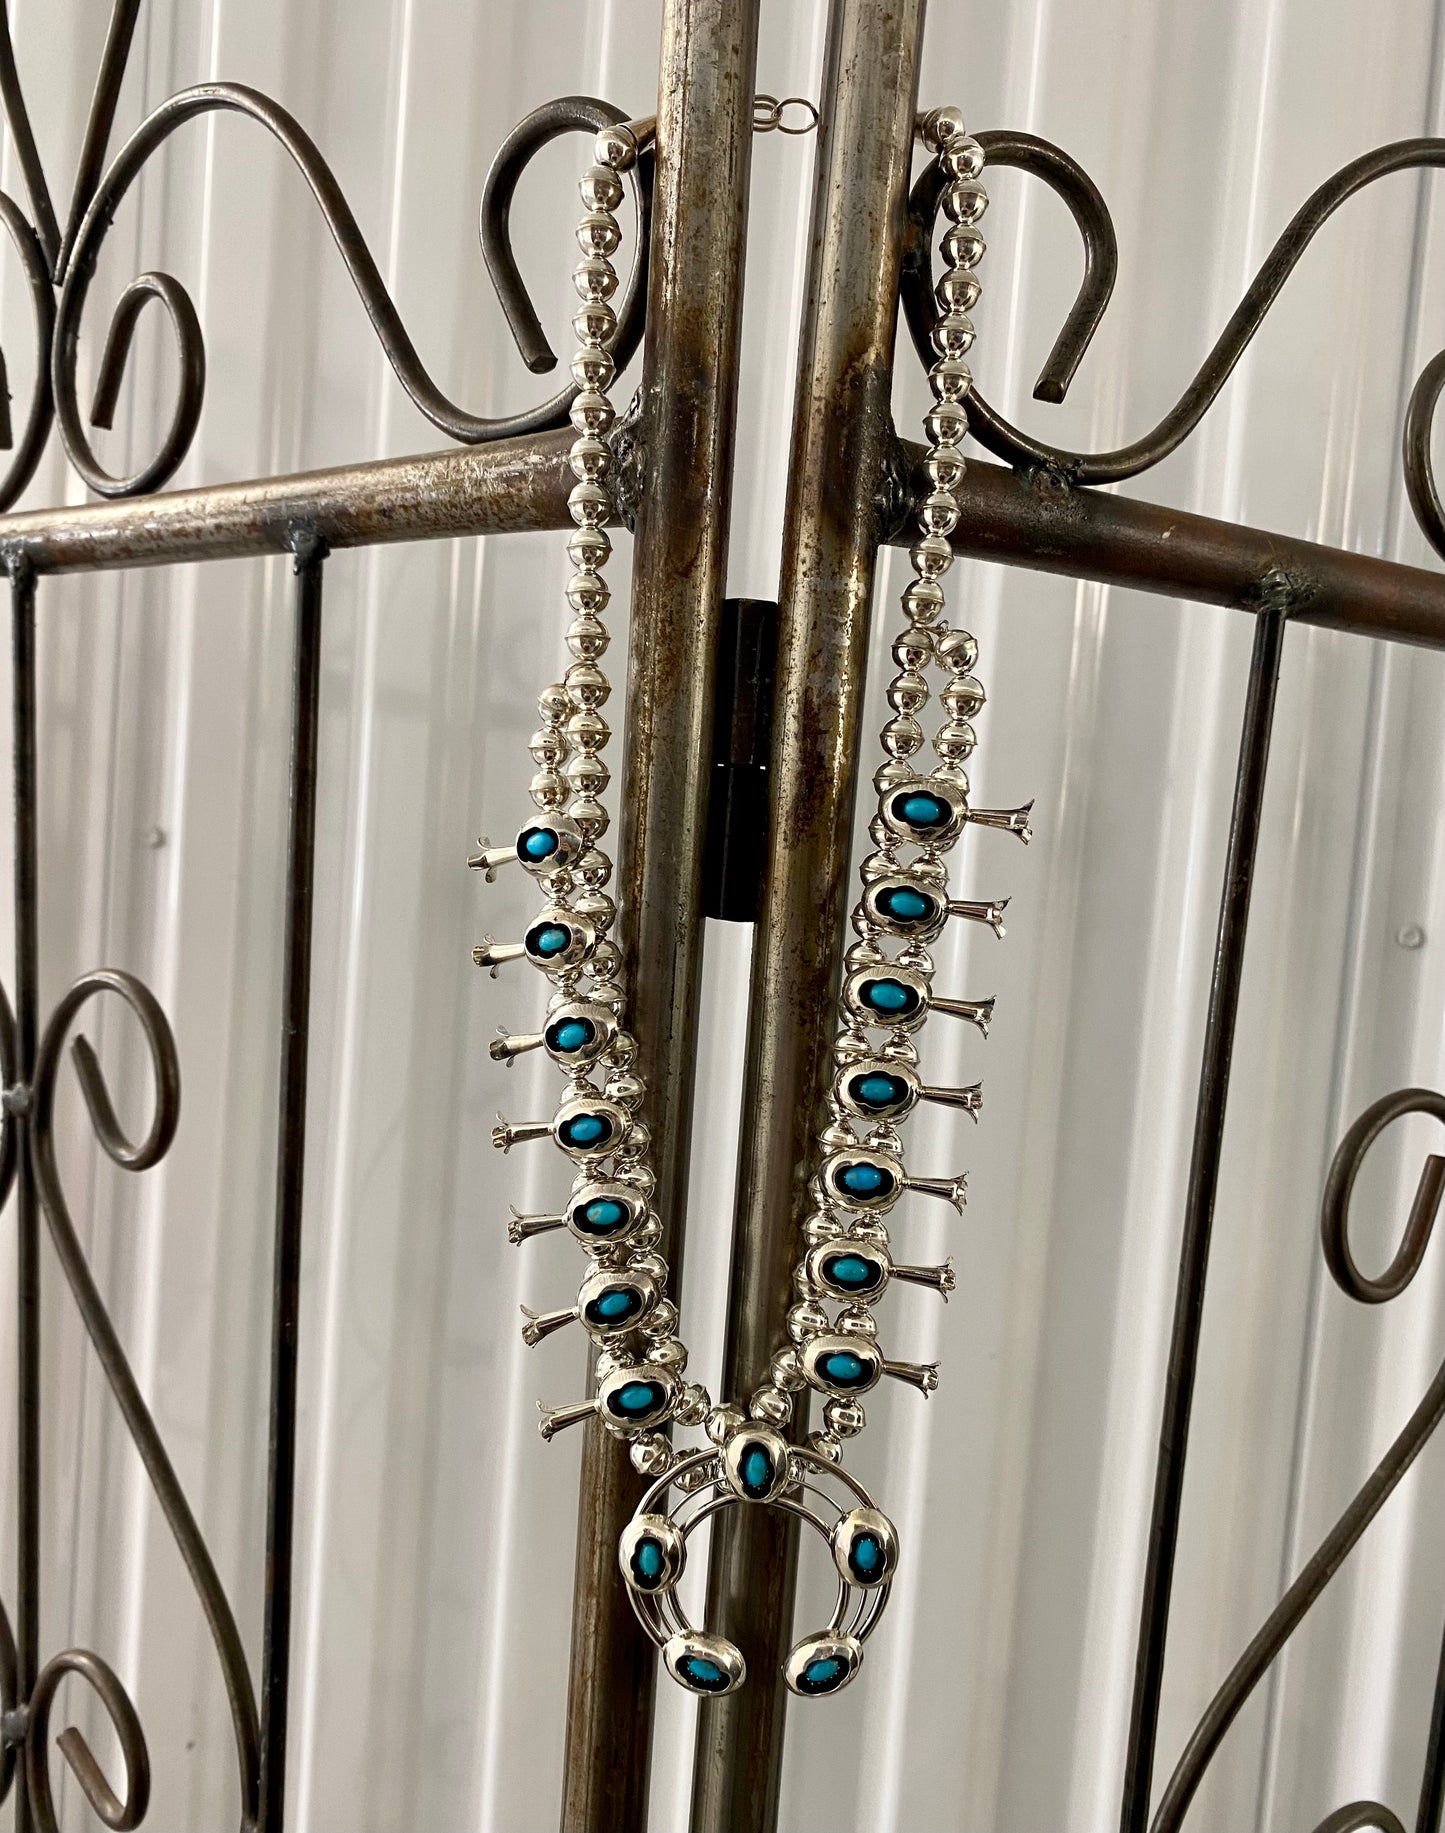 The Turquoise Squash Blossom & Earrings Set Signed PG